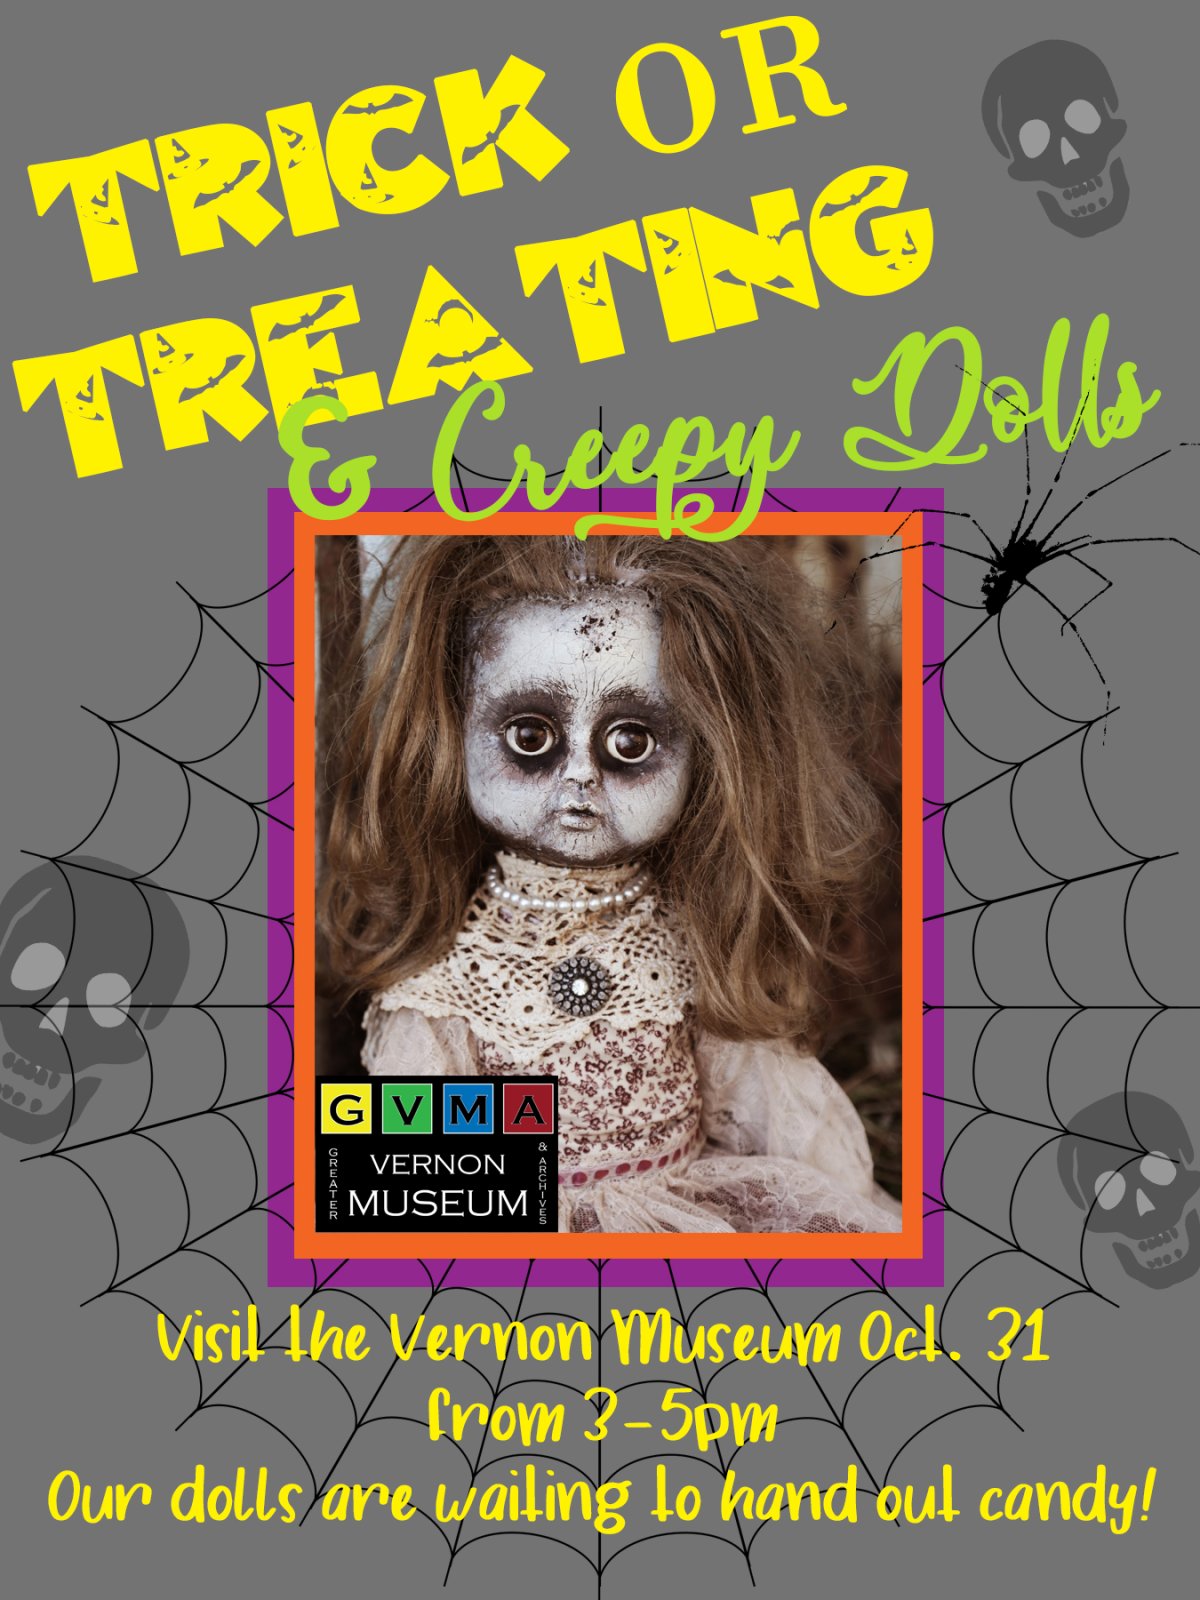 Trick-or-Treating and Creepy Dolls at the Vernon Museum - image